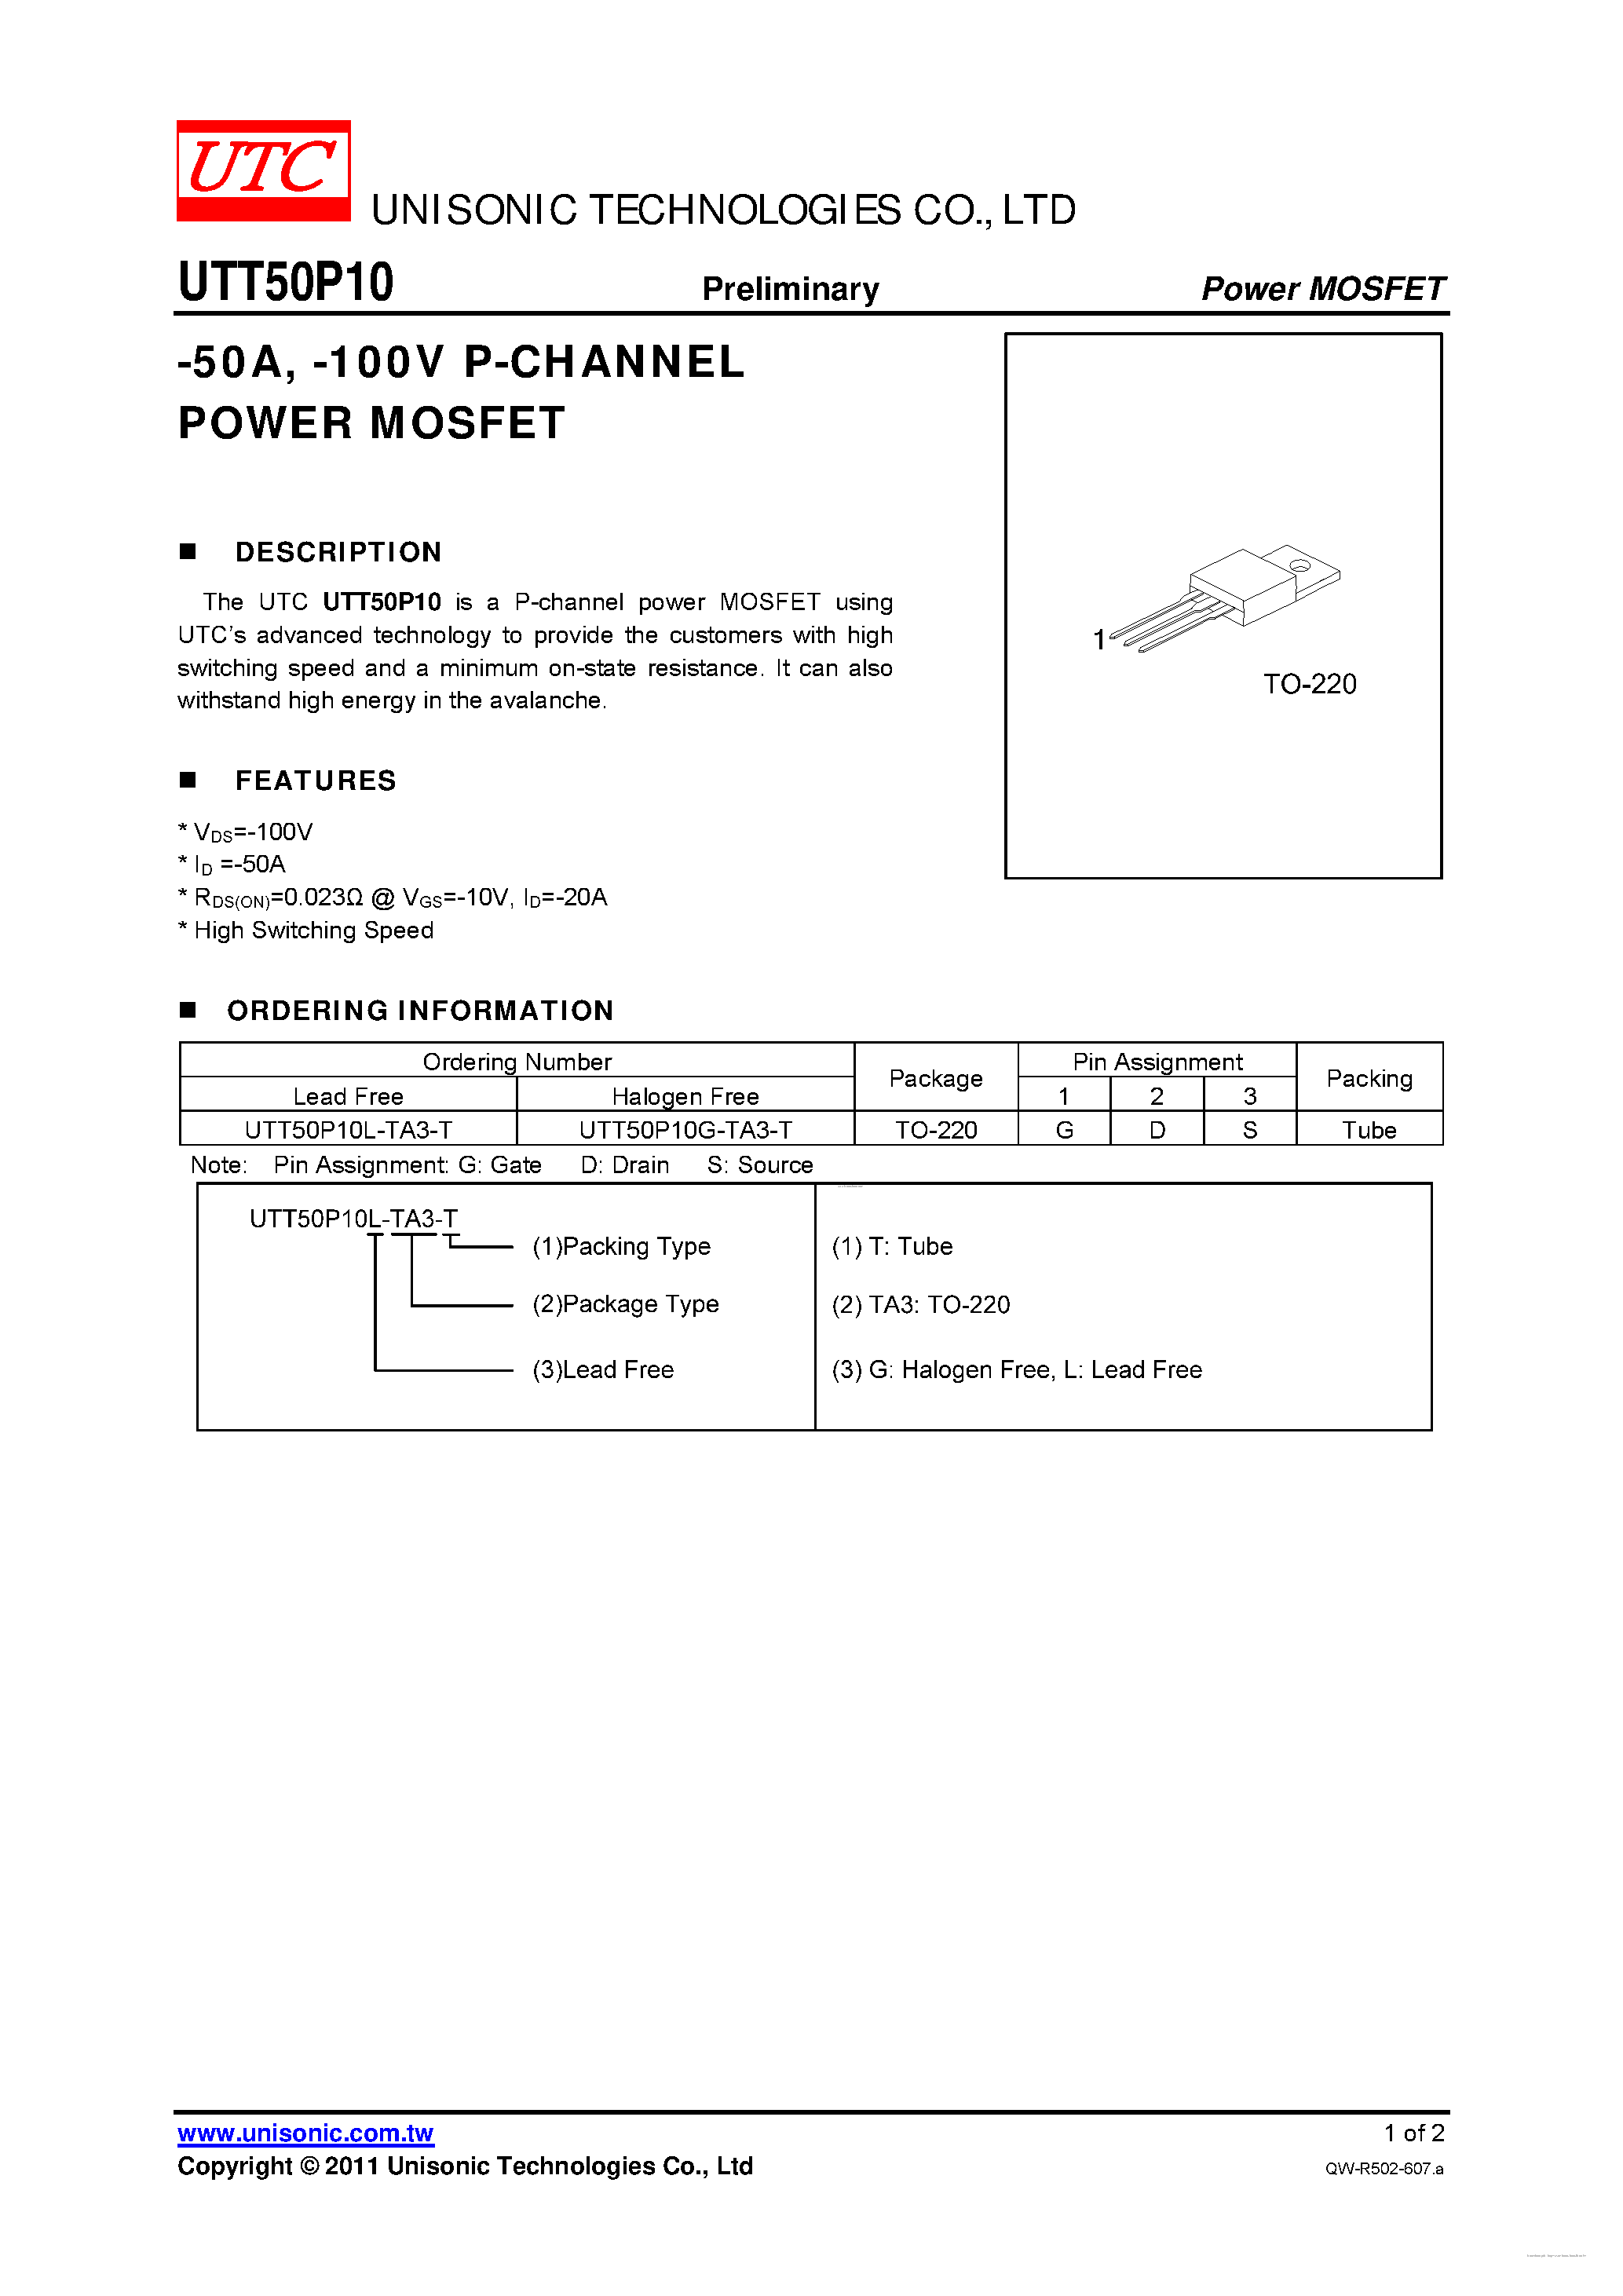 Даташит UTT50P10 - P-CHANNEL POWER MOSFET страница 1